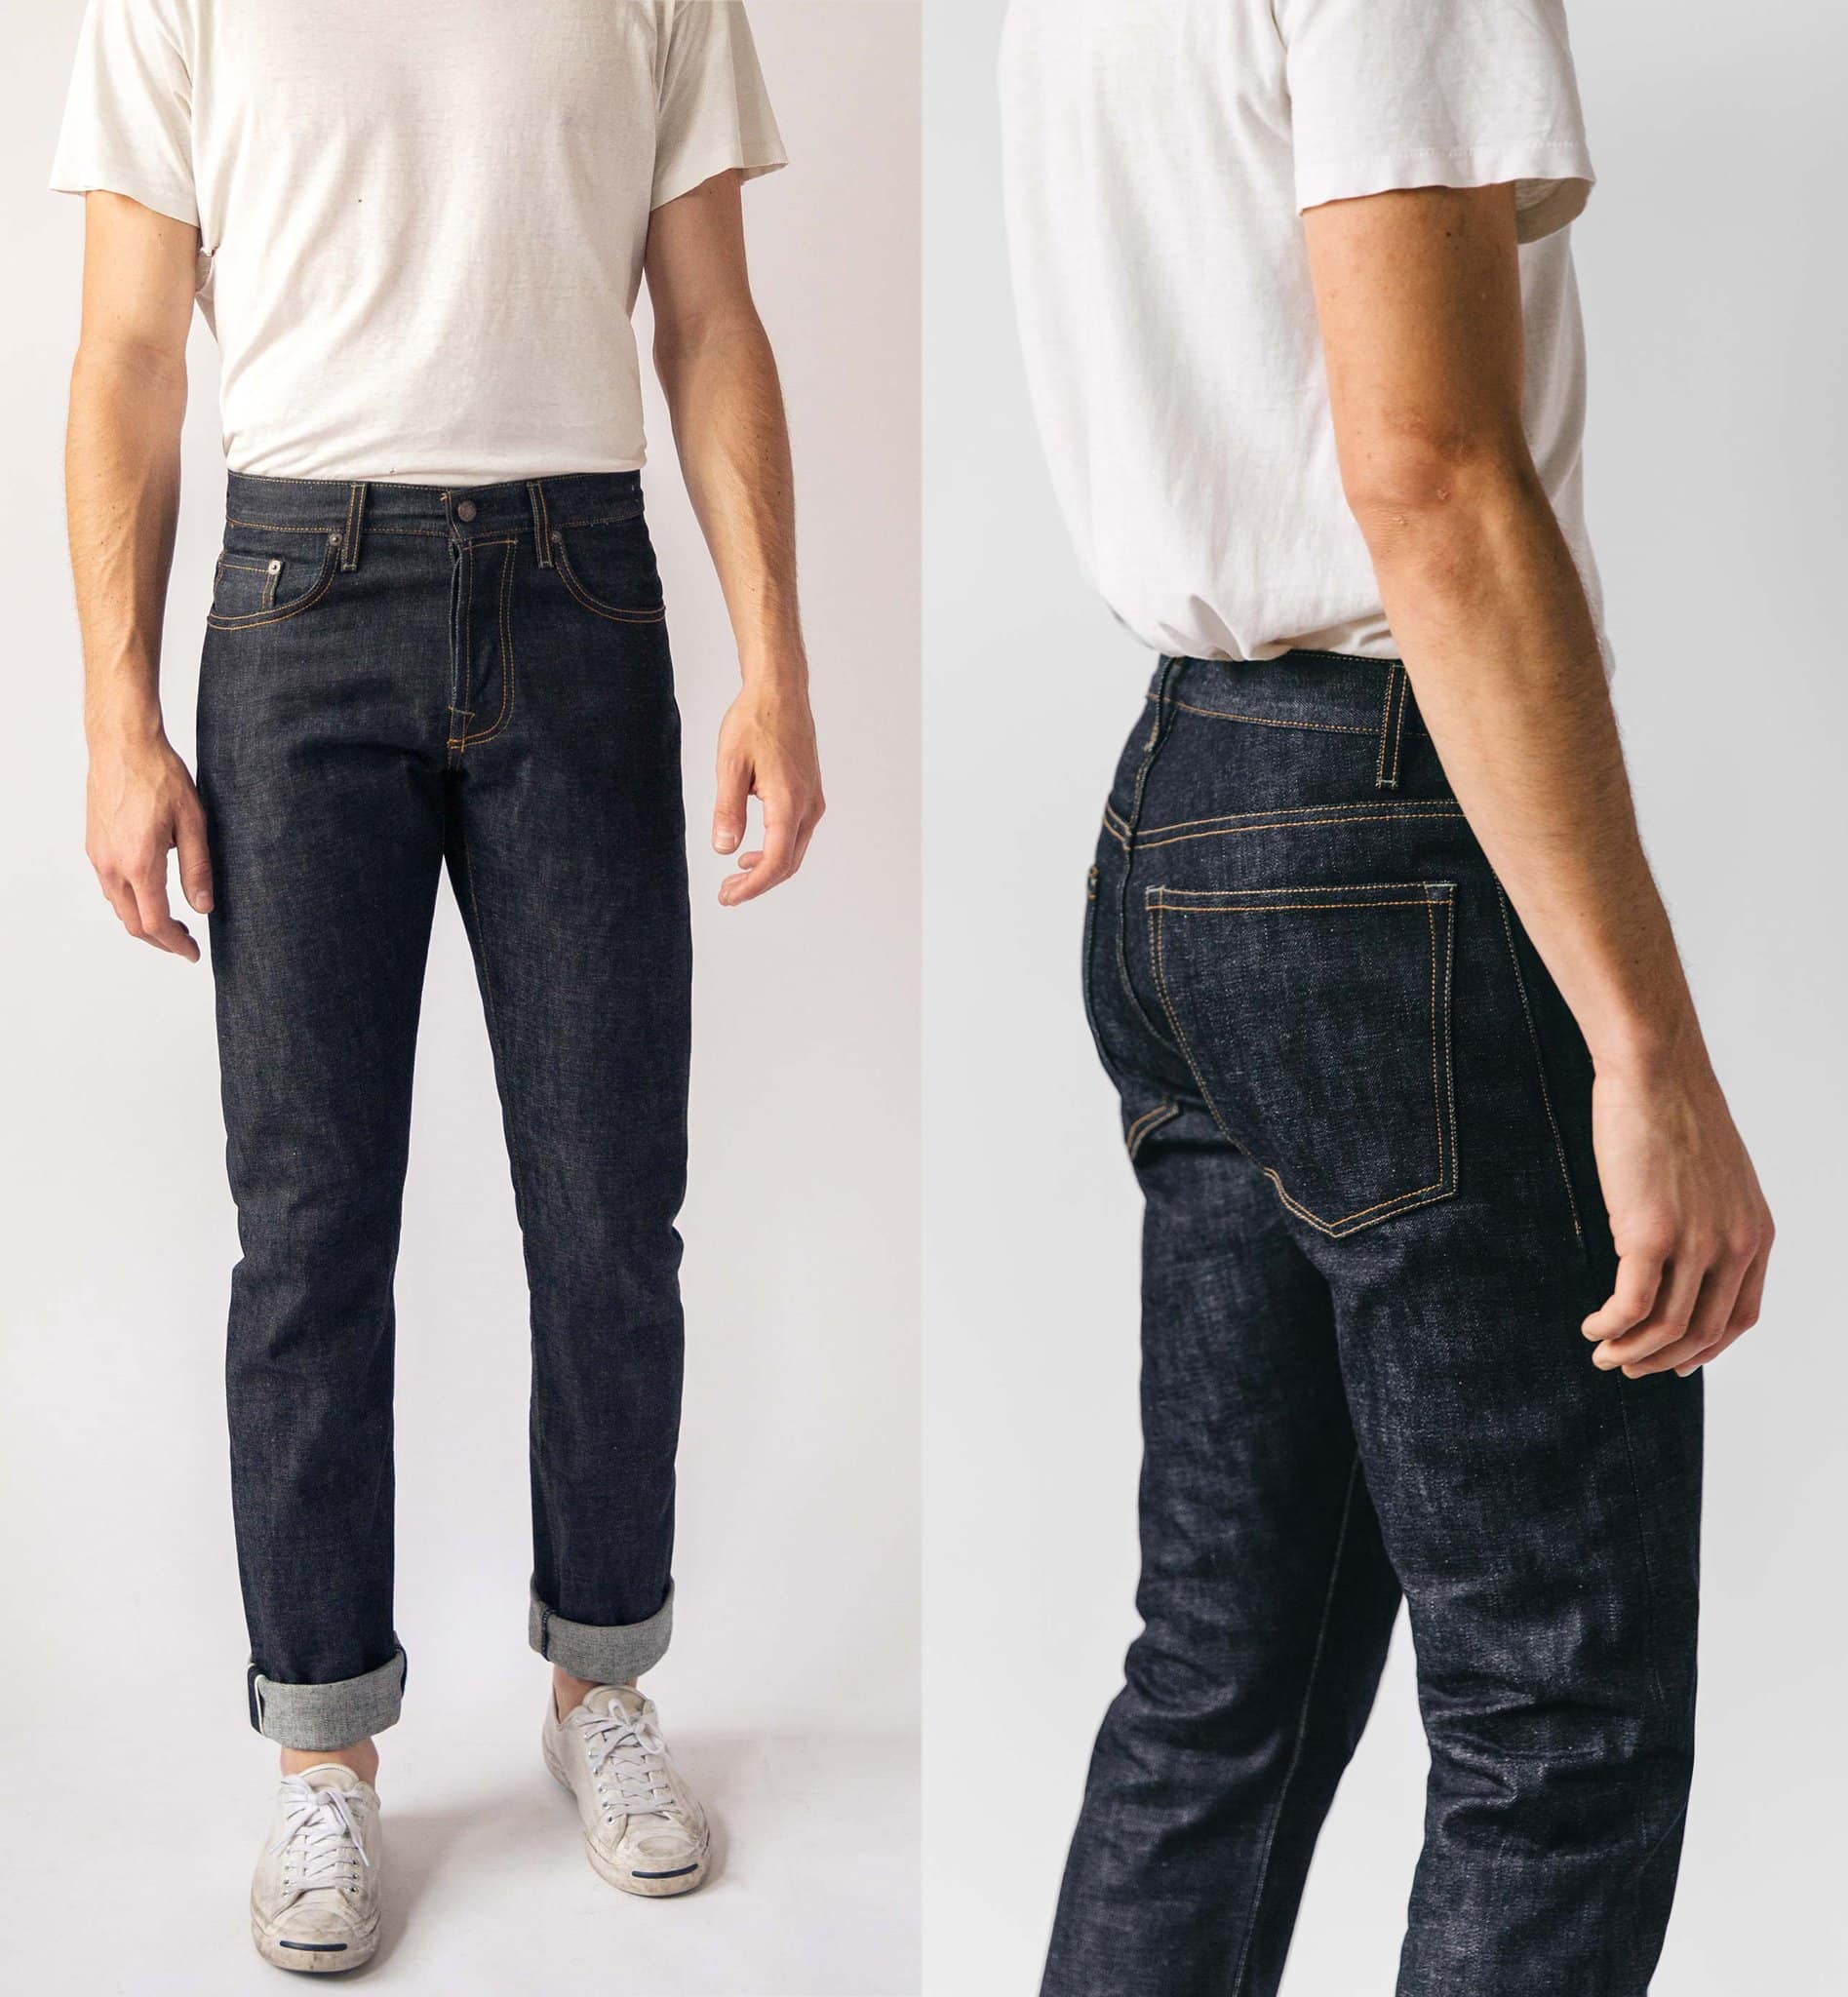 The Barton Slim Indigo Jp ($235) features an open weave fabric with a button-fly 5-pocket construction